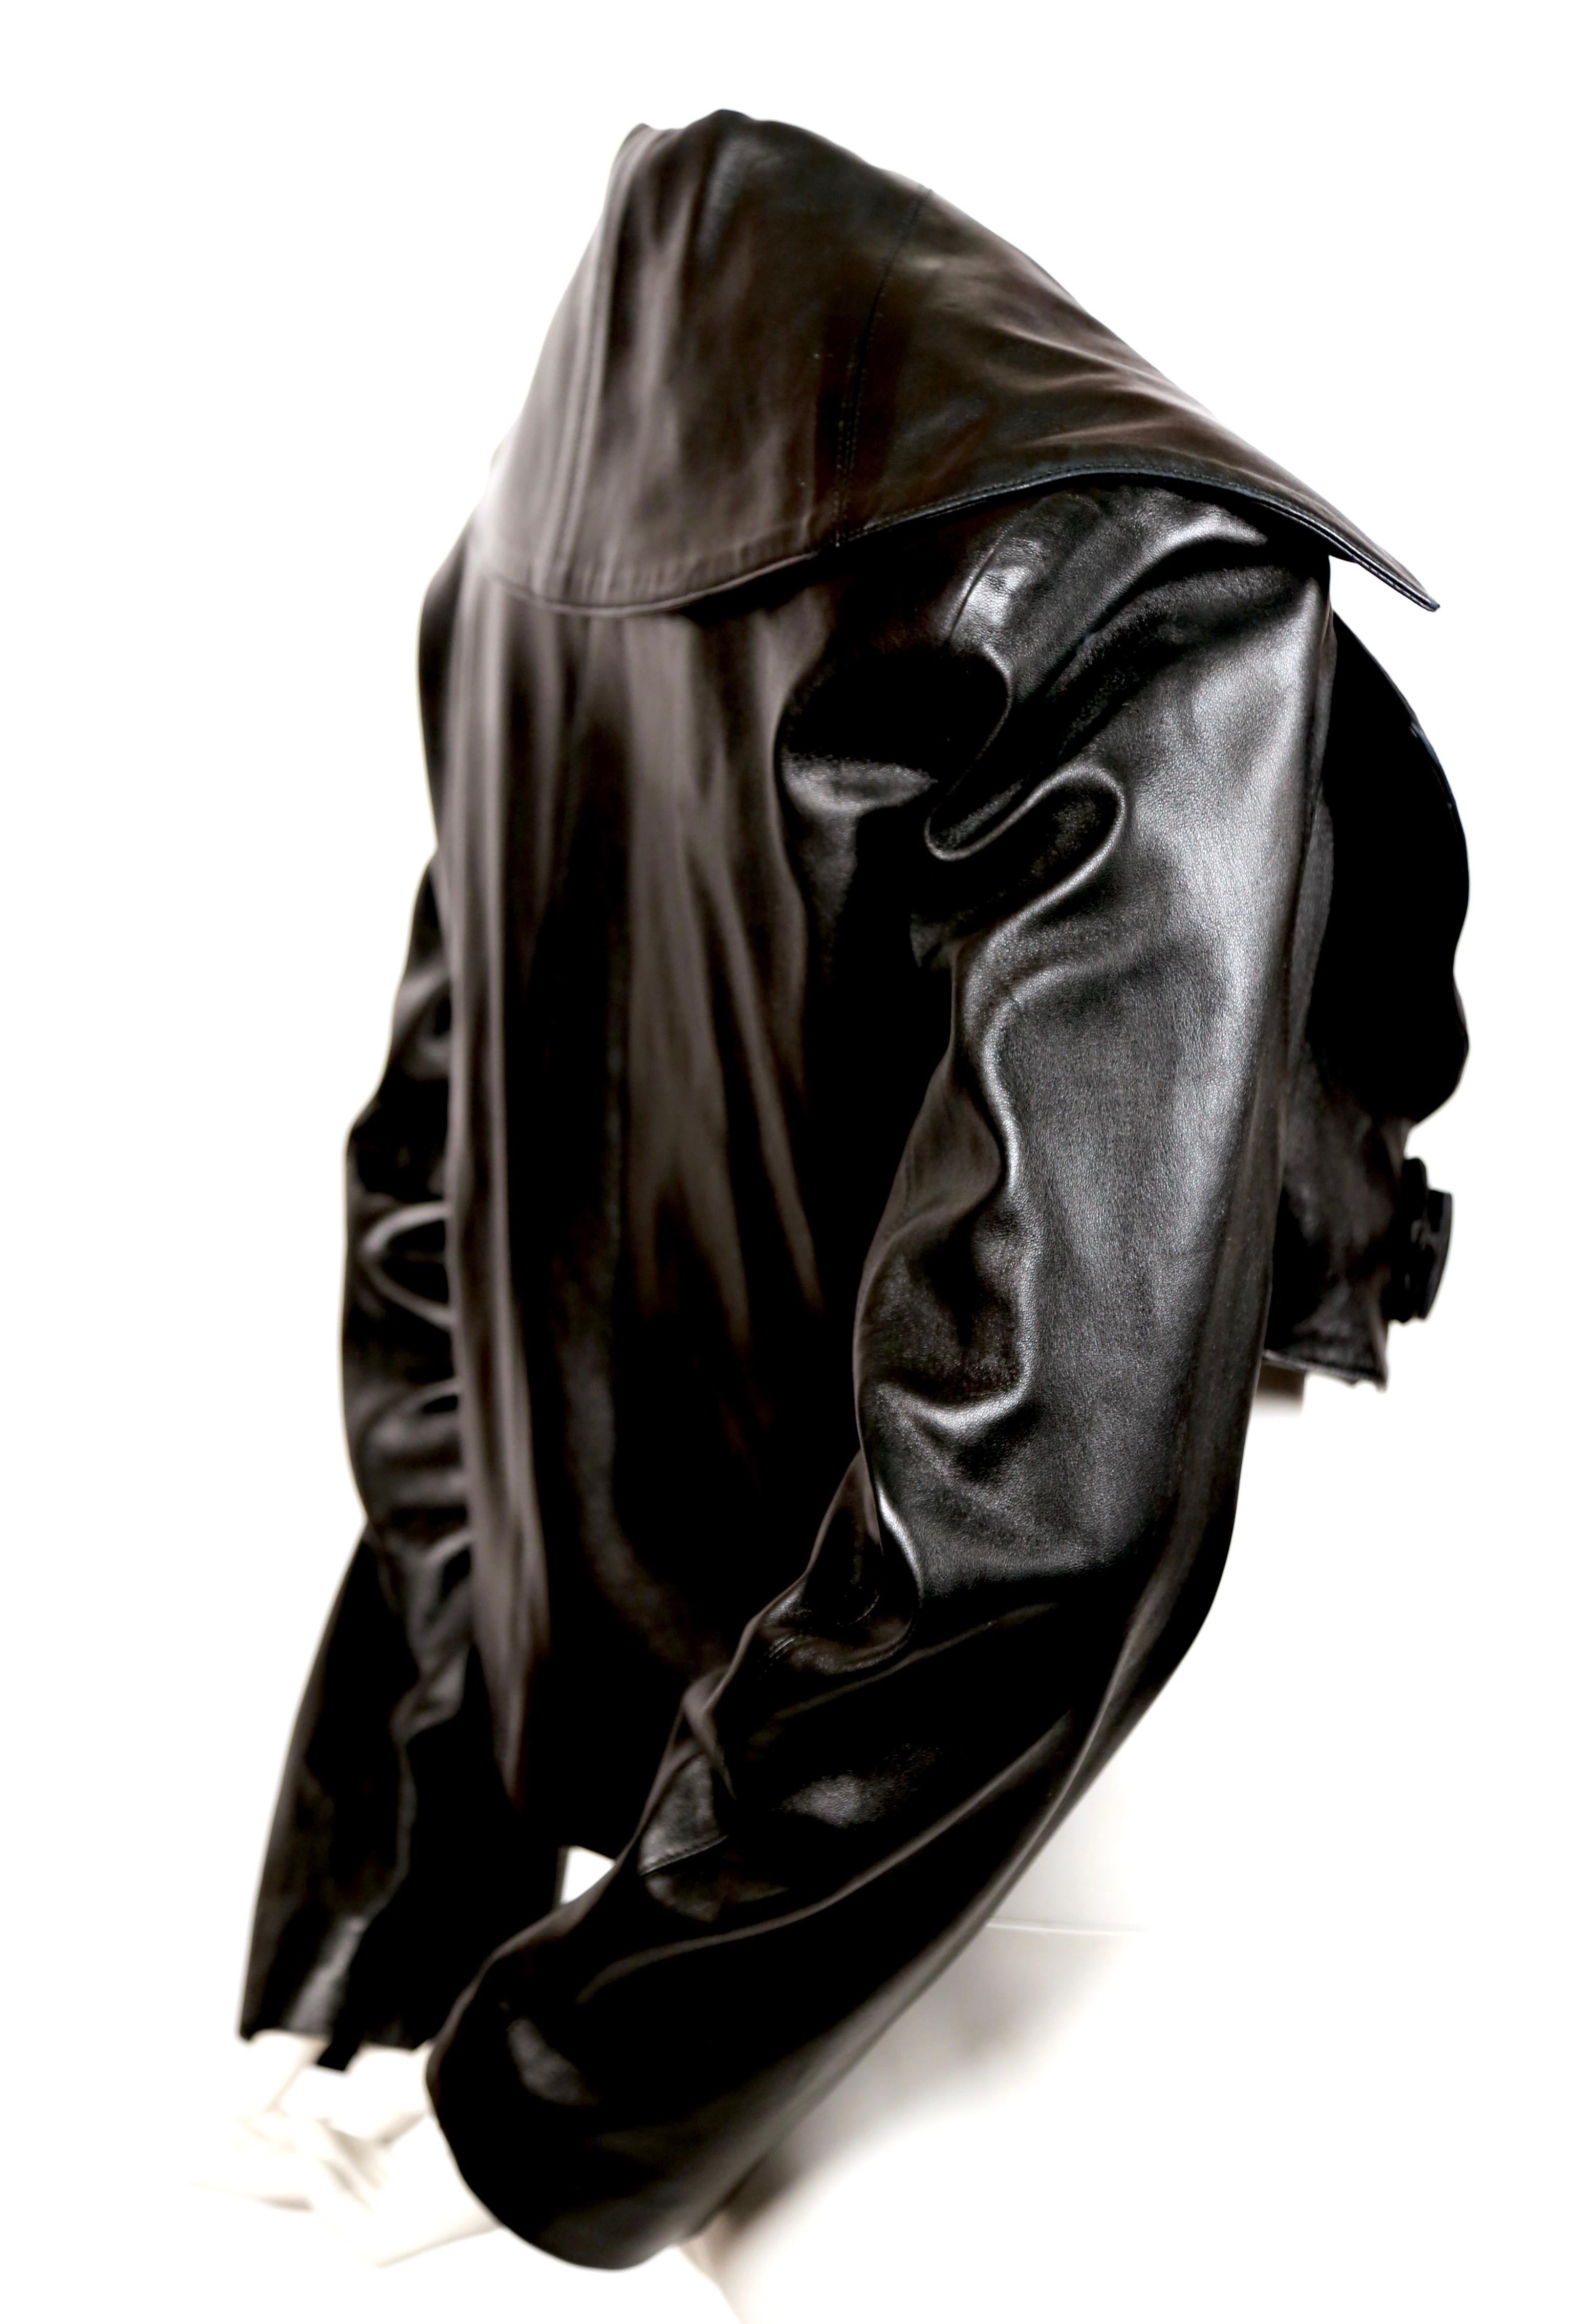 Jet black butter soft leather jacket with shawl collar and frog closure designed by Azzedine Alaia dating to fall of 1991. Fits shorter in the front than the back. Labeled a FR 36. Approximate measurements: bust 36